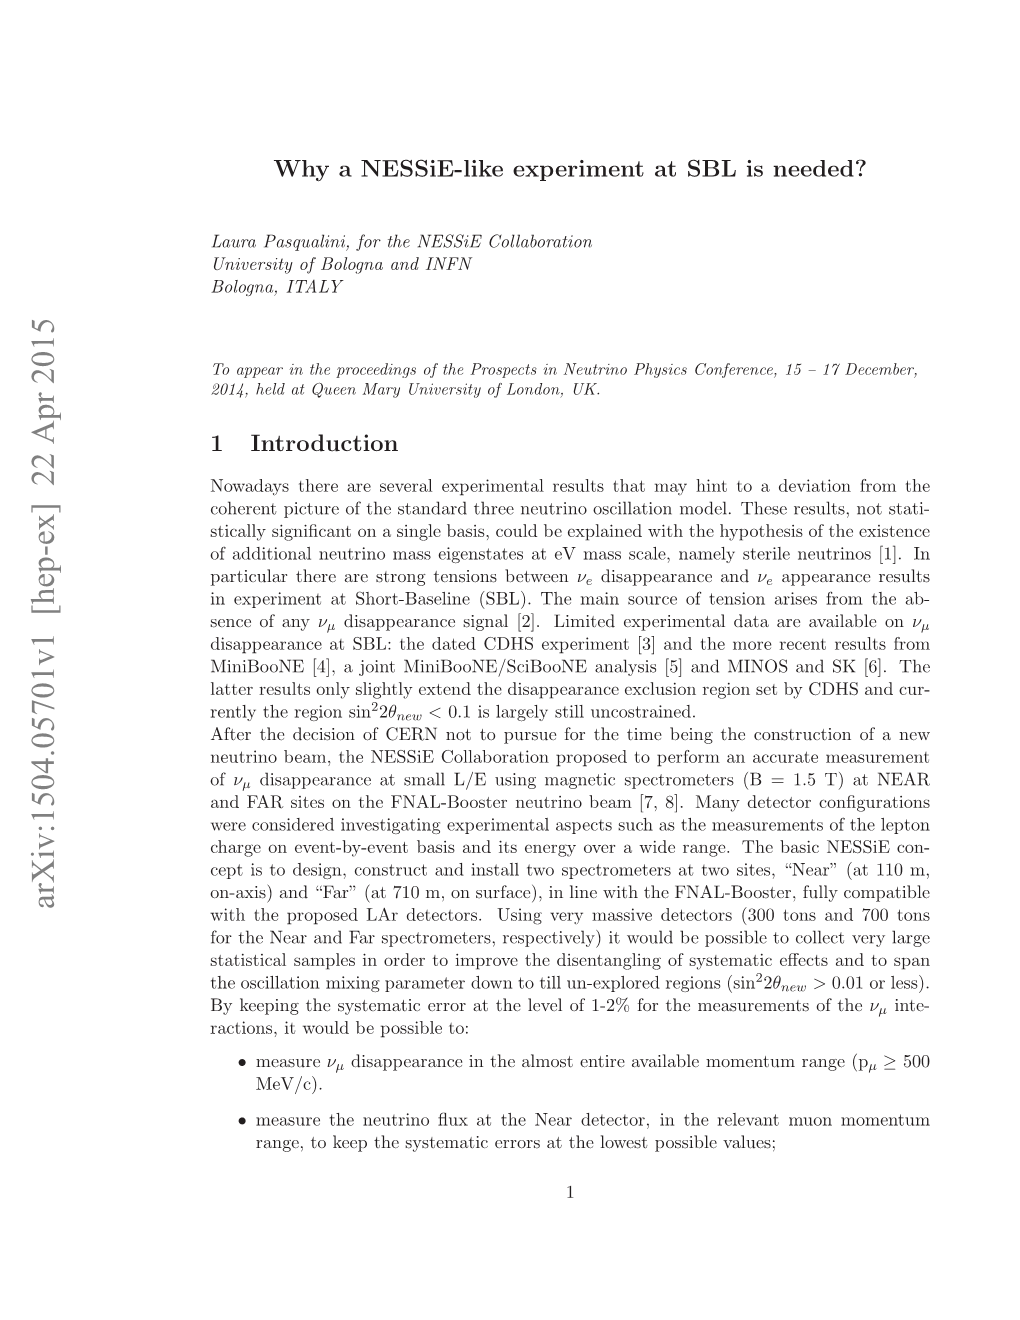 Why a Nessie-Like Experiment at SBL Is Needed?